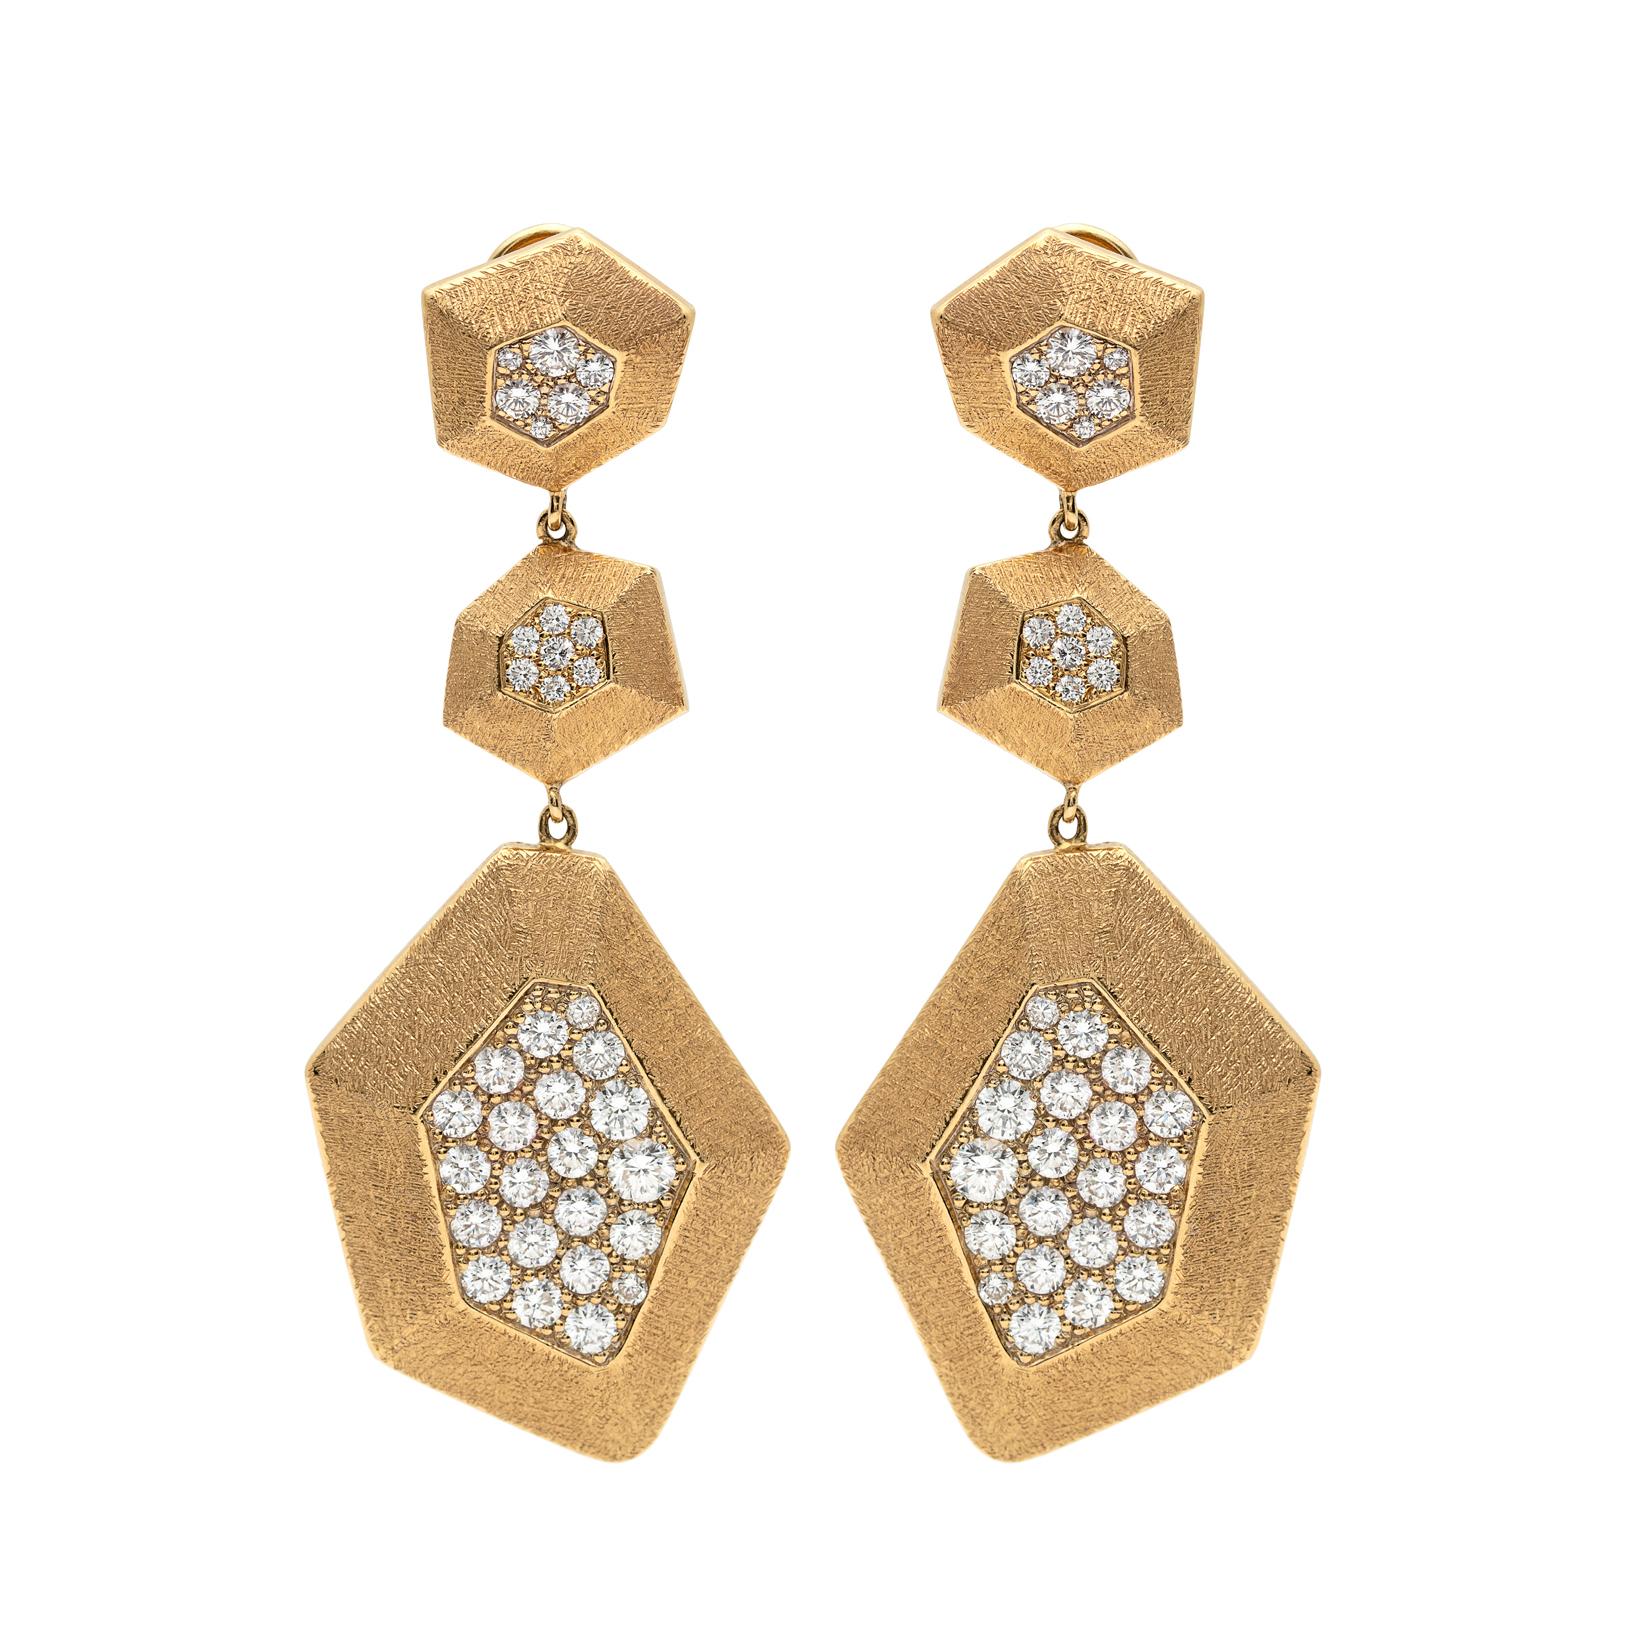 Diamond and Gold Earrings by Mimi So